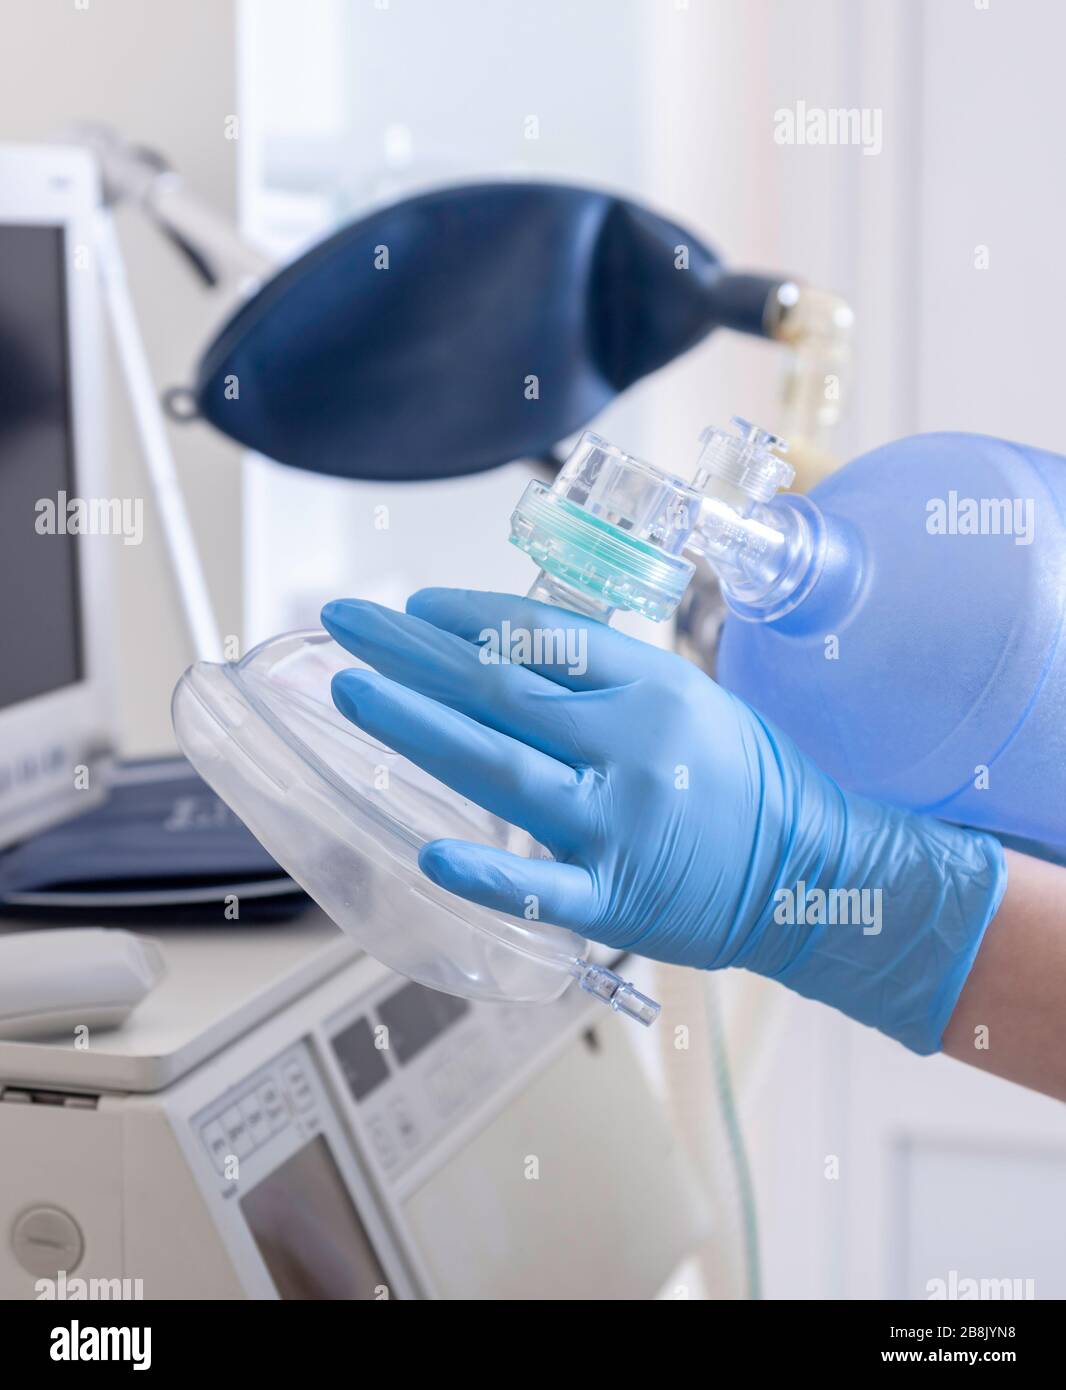 Device for anesthesia in the operating room. Hand with tool for oxygen during the surgery. Stock Photo